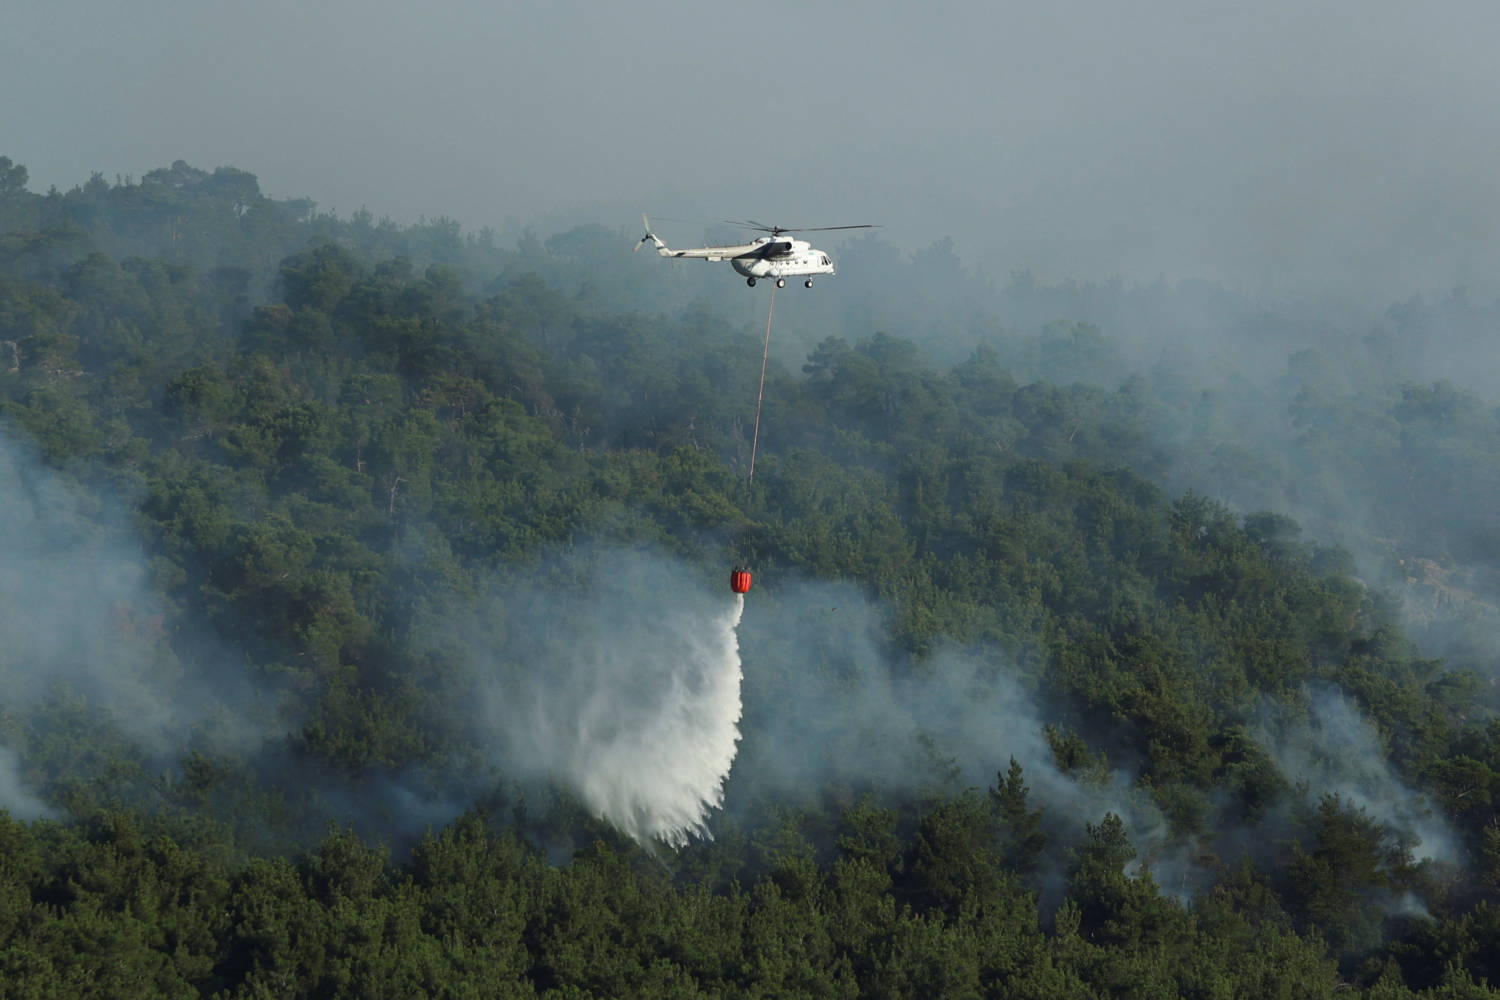 Wildfire In The Dadia National Park, In The Region Of Evros